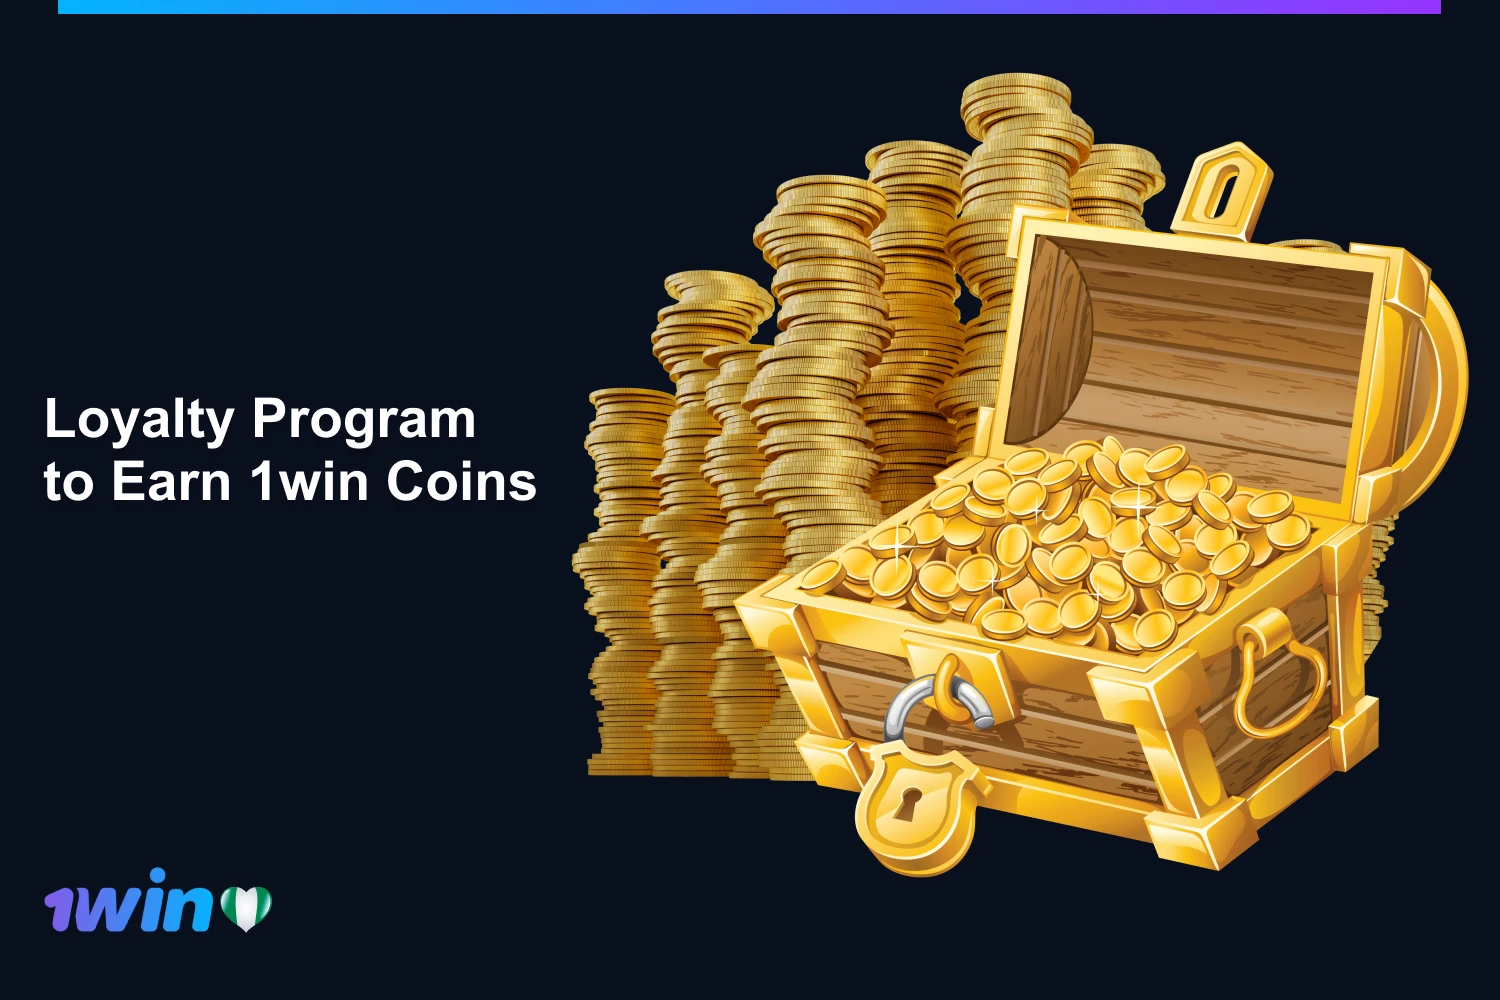 The 1win loyalty program allows Nigerians to get coins for betting real money and playing slots